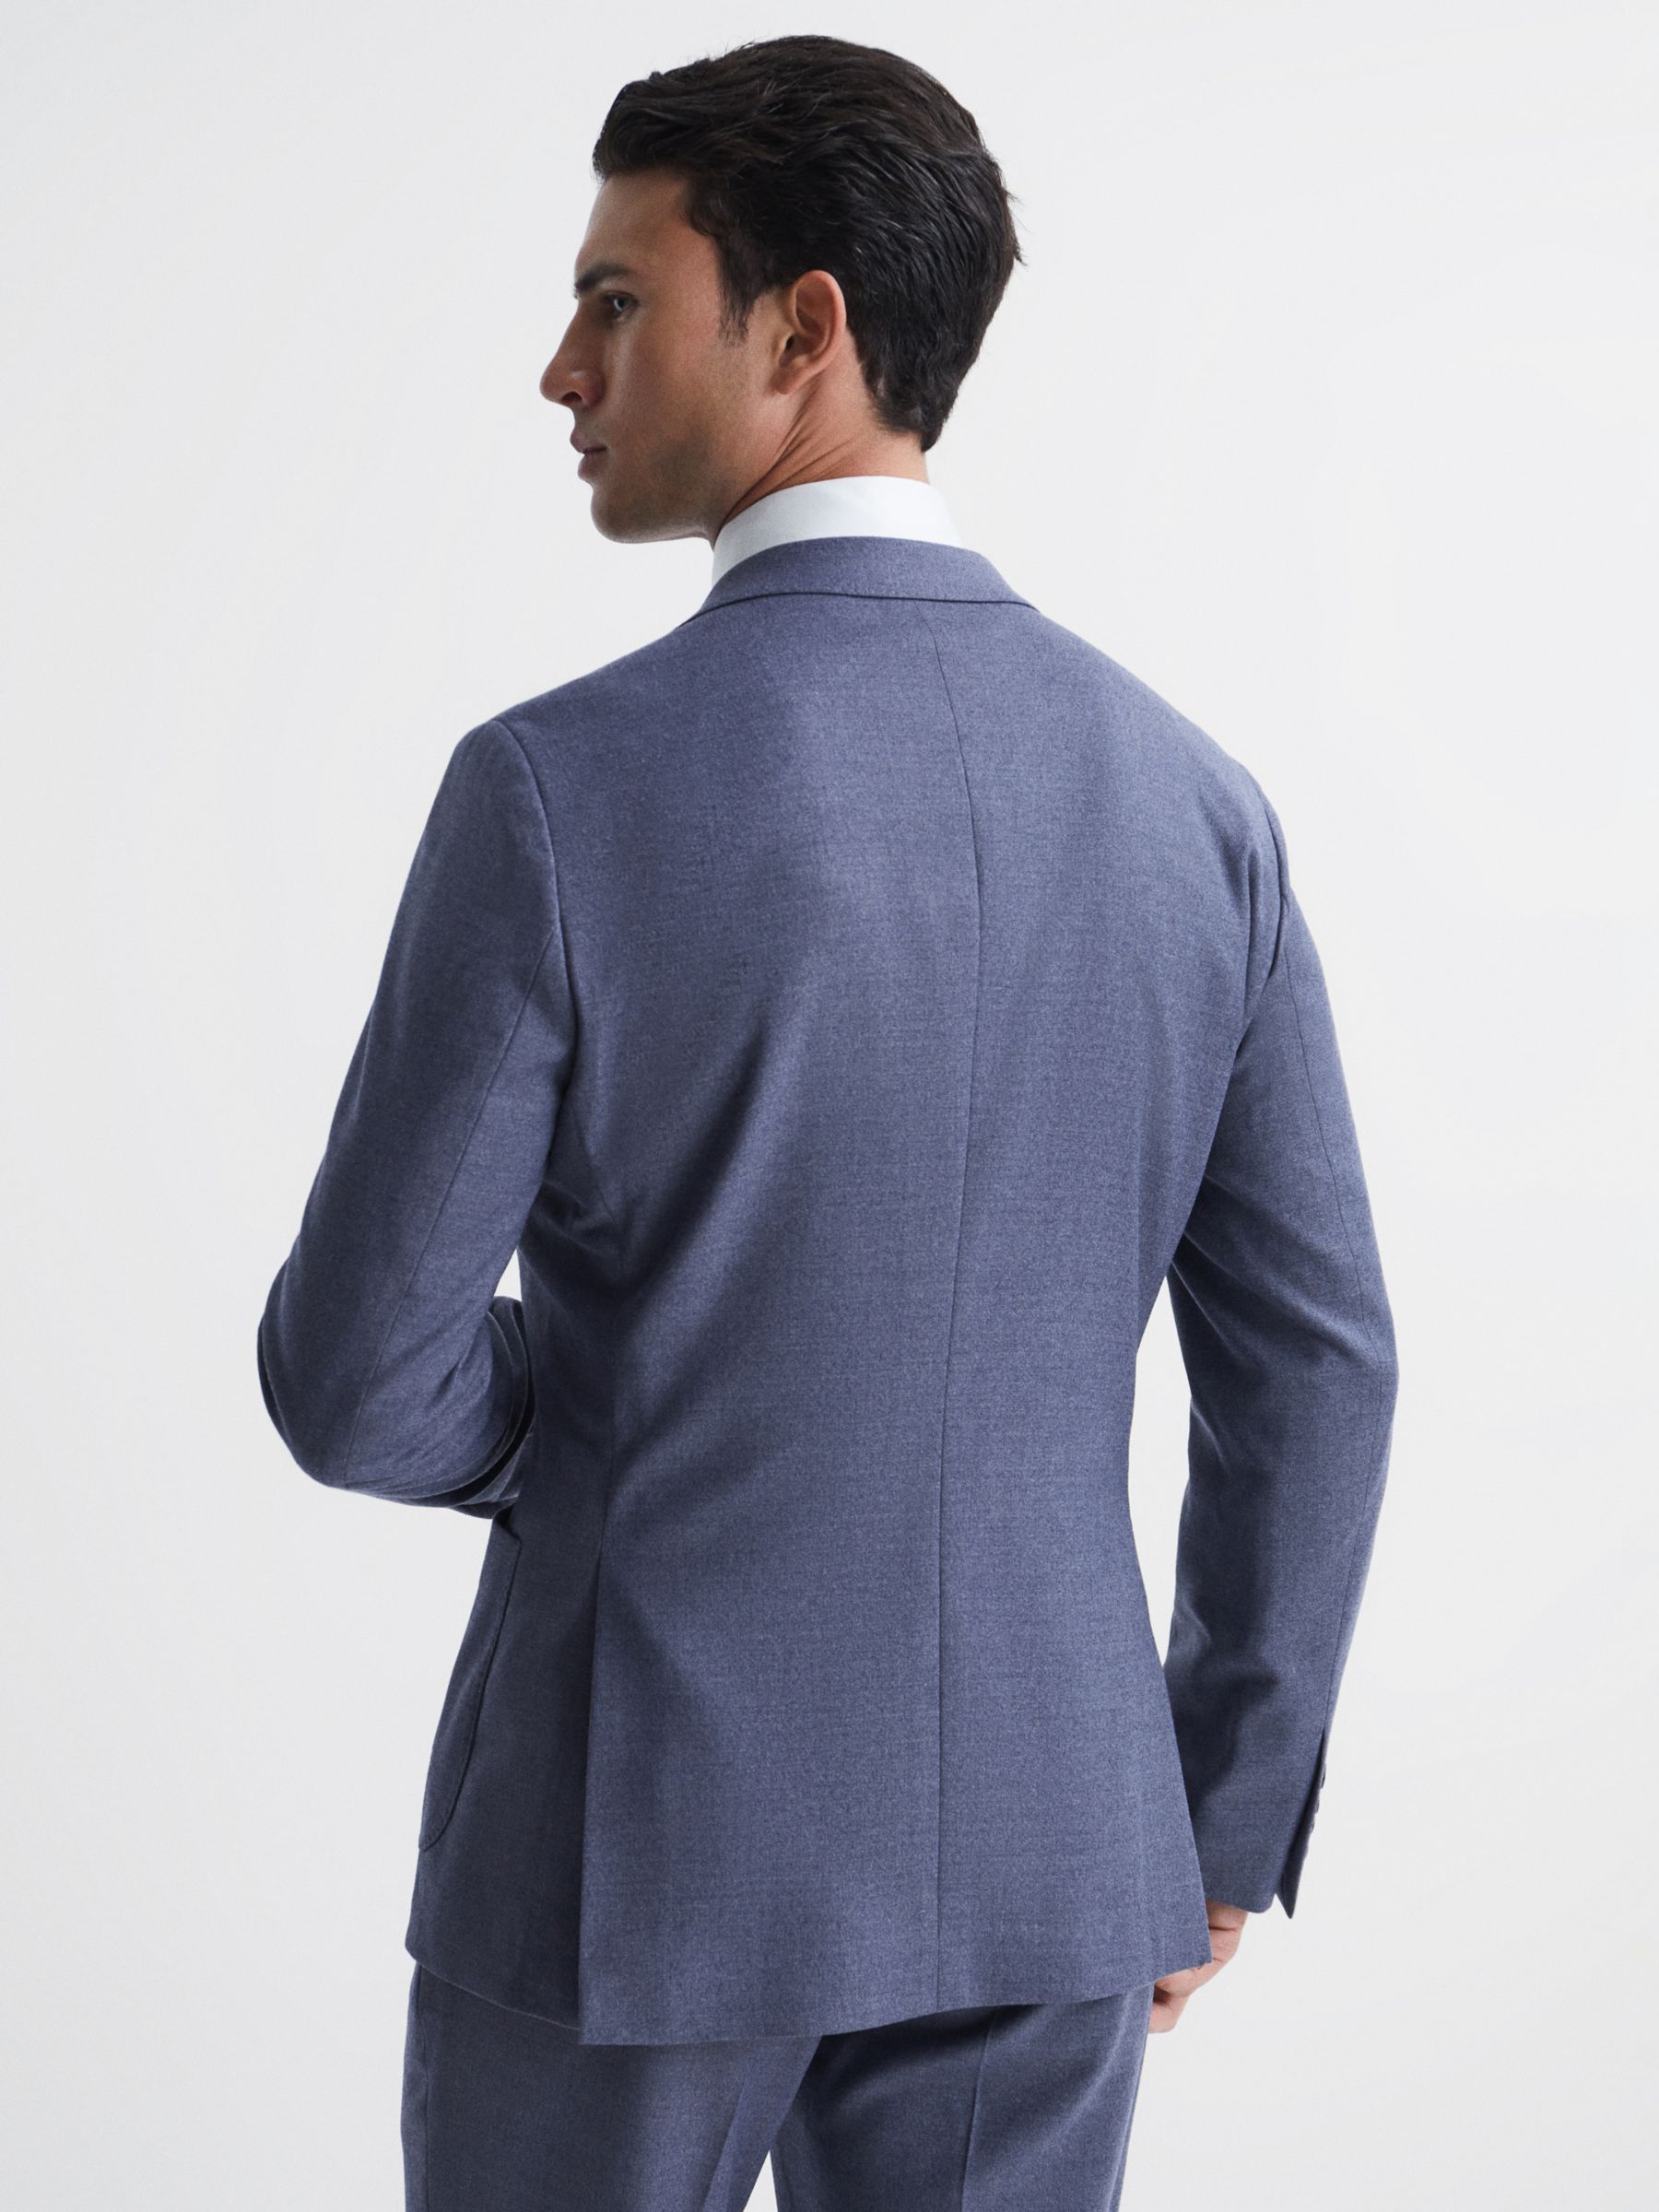 Reiss Marquee Double Breasted Wool Blend Suit Jacket, Airforce Blue, 44